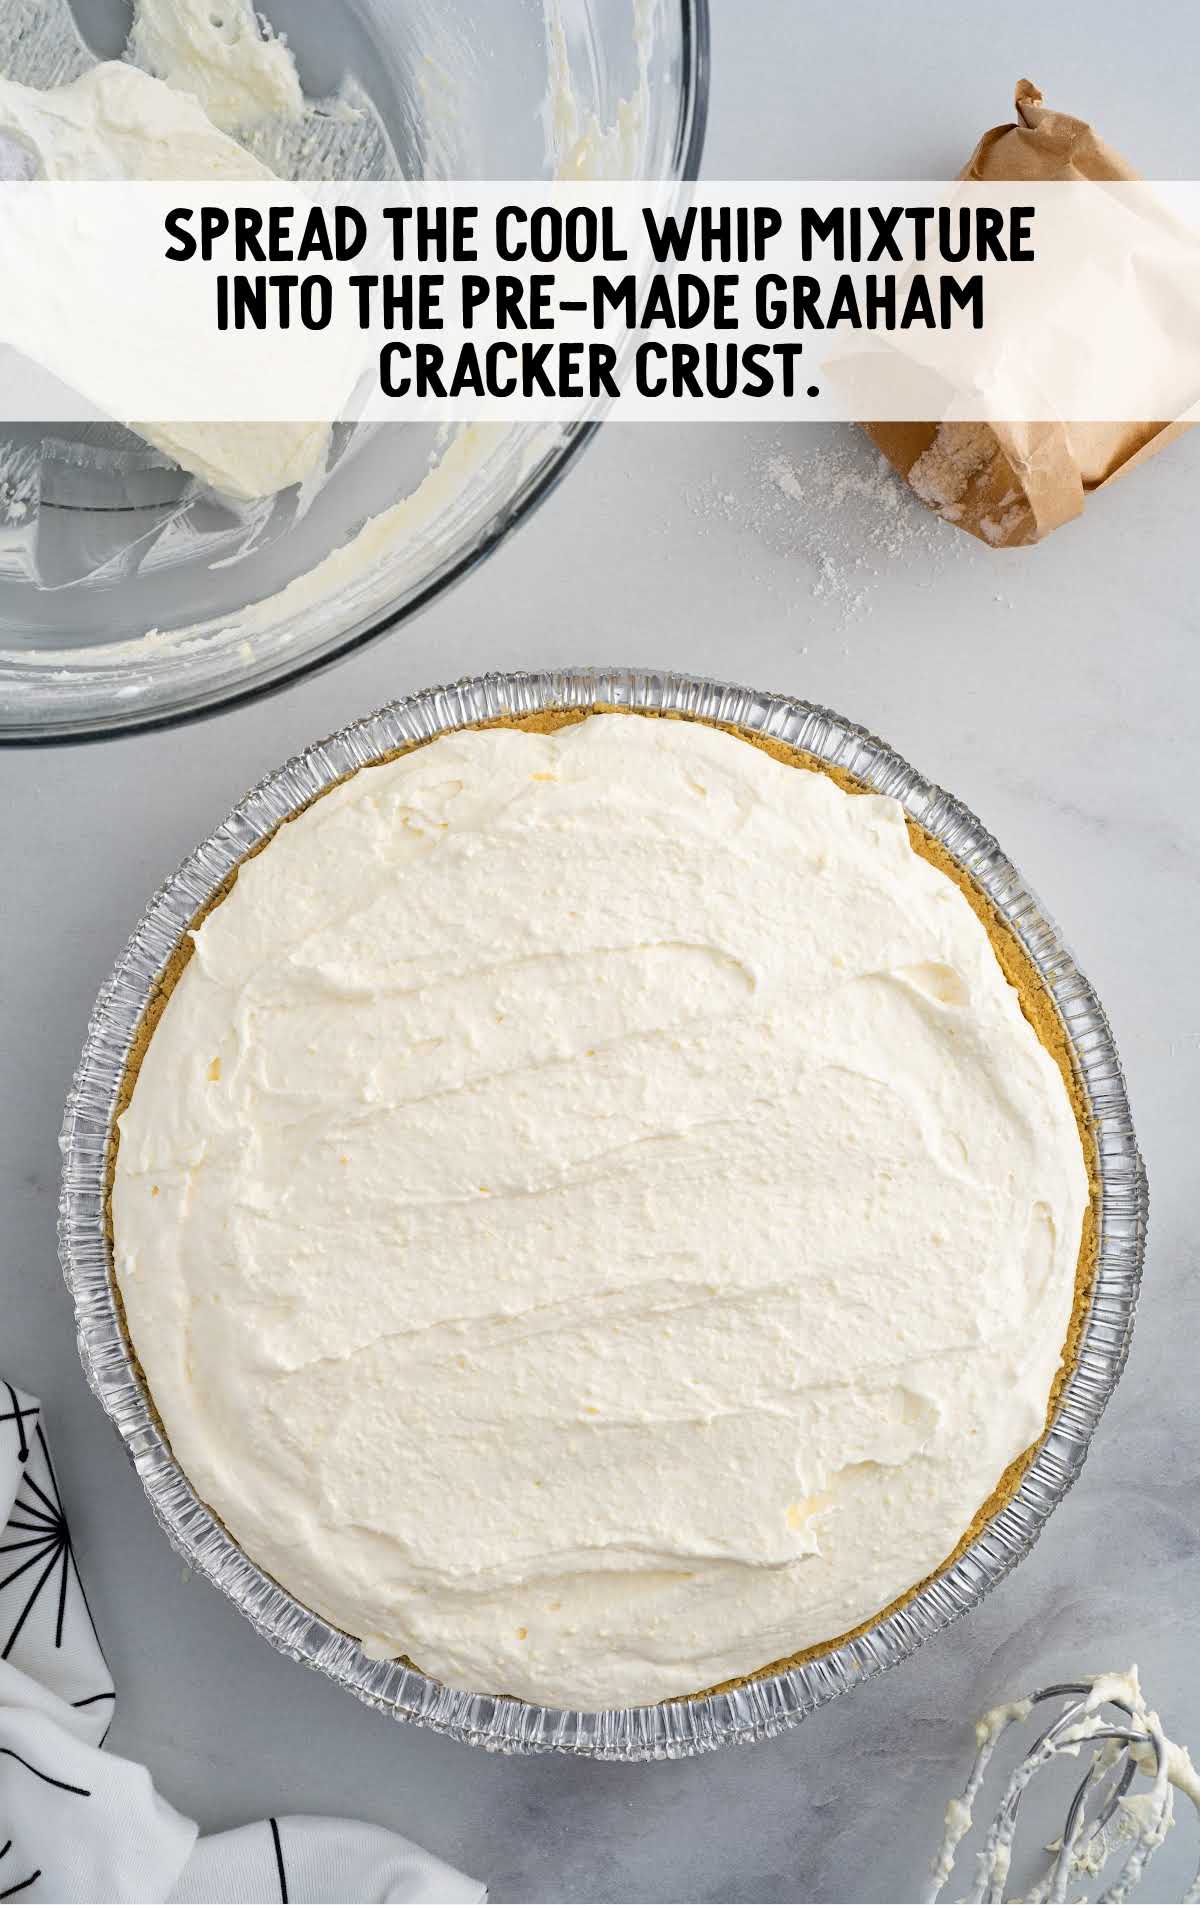 cool whip mixture added to the pre-made graham cracker crust